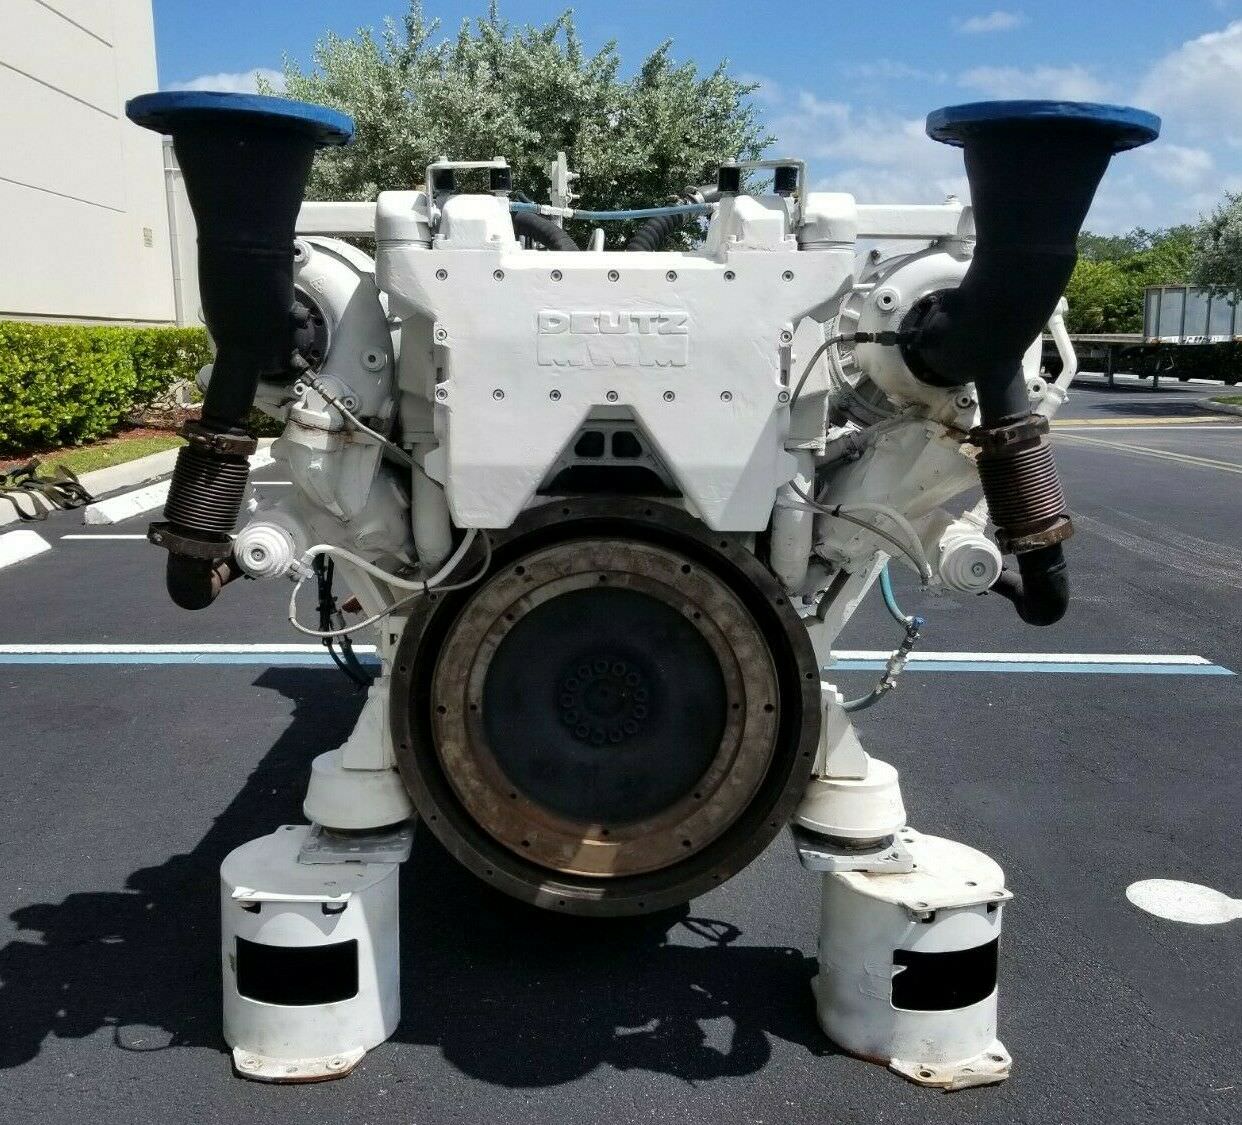 Theres A Twin Turbo 1823 Hp 2135 Cu In Deutz V16 Engine For Sale